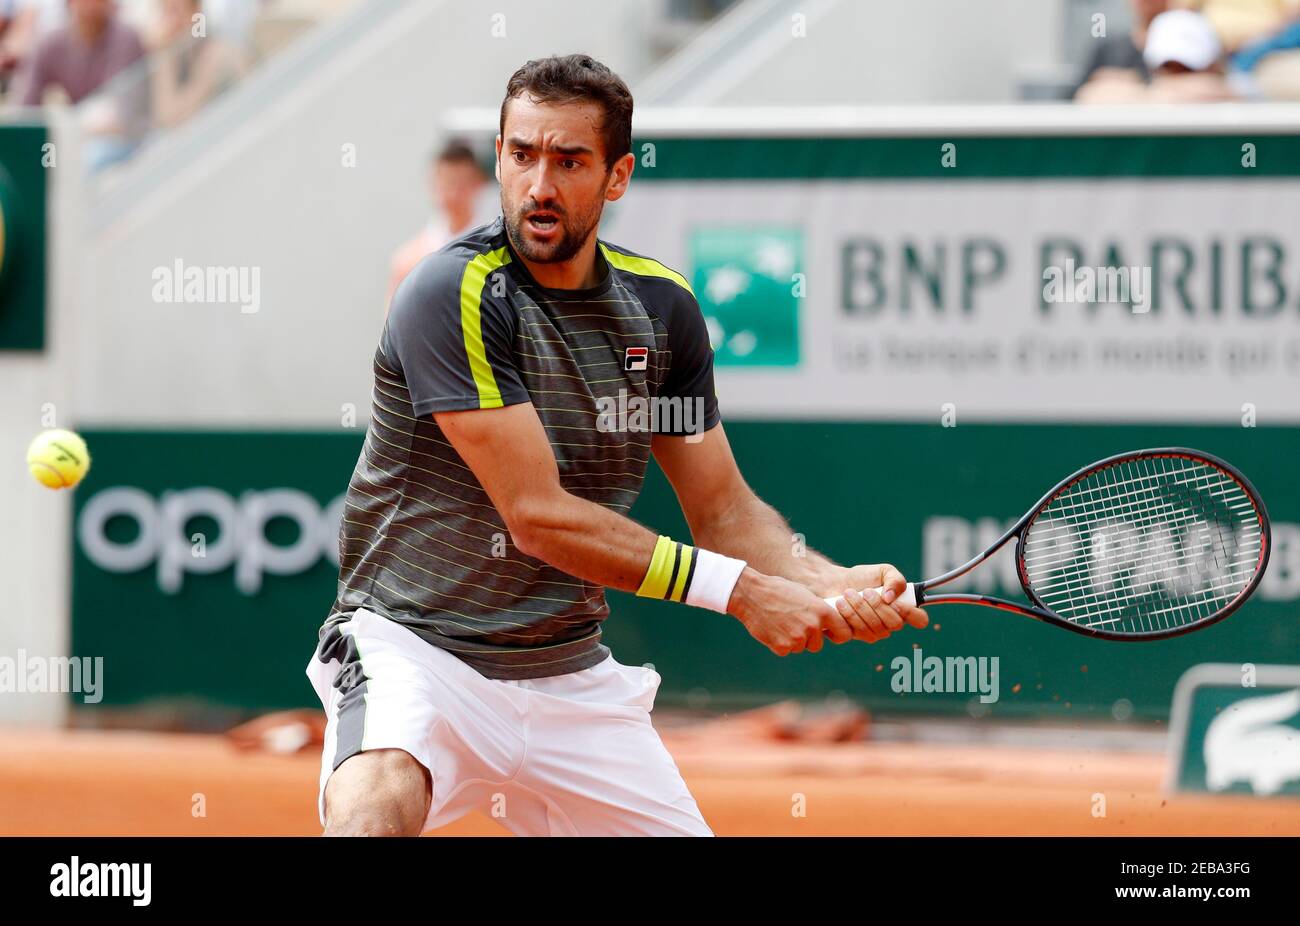 Tennis - French Open - Roland Garros, Paris, France - May 29, 2019.  Croatia's Marin Cilic in action during his second round match against  Bulgaria's Grigor Dimitrov. REUTERS/Vincent Kessler Stock Photo - Alamy